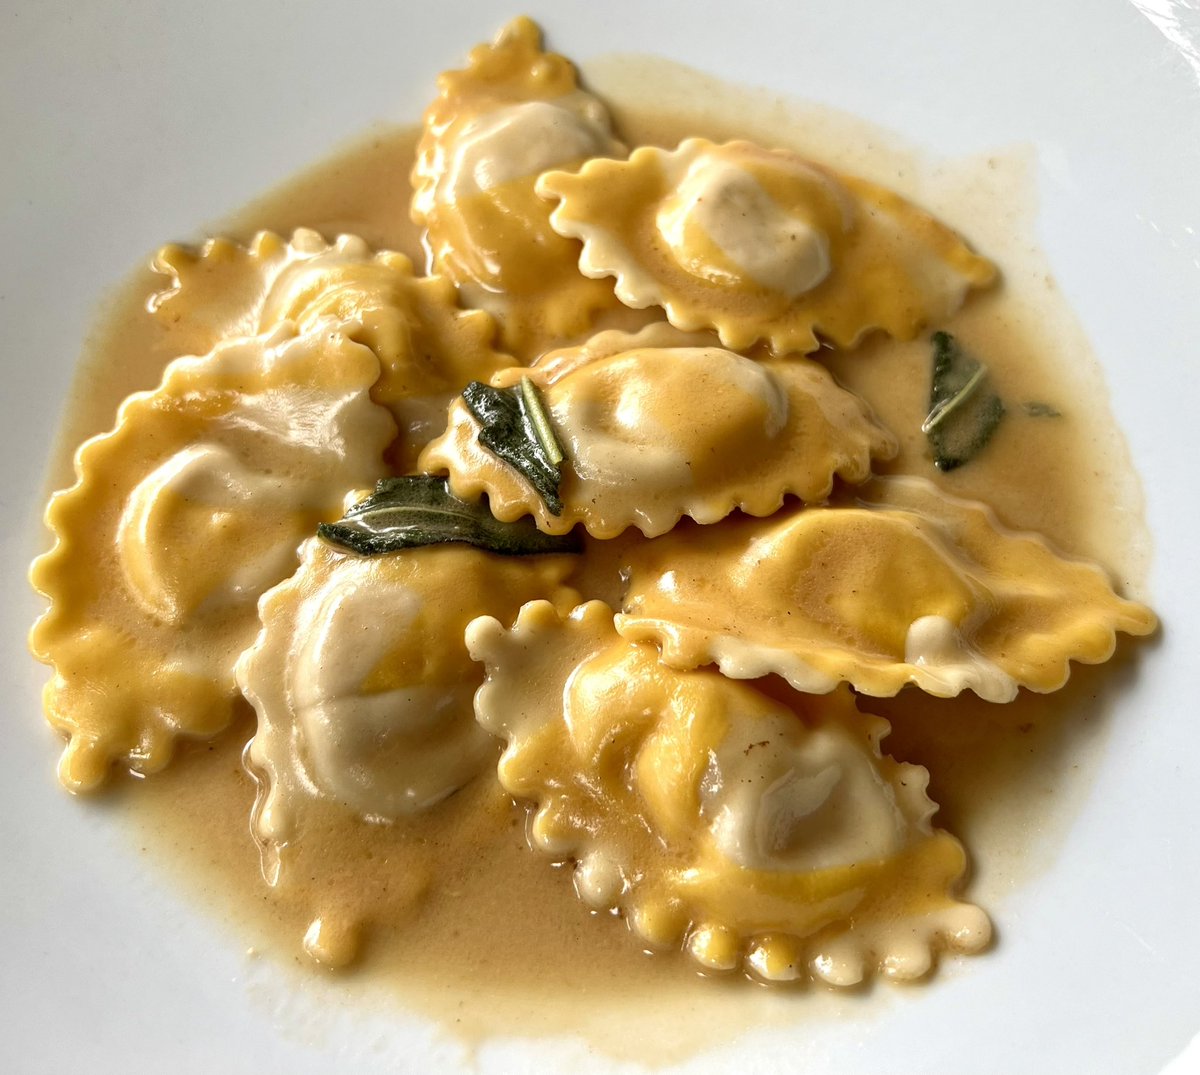 🍝✨ Just indulged in the most heavenly Chicken Ravioli at @viaalloro in Beverly Hills! Each bite of these perfectly crimped ravioli was a burst of flavor, 😋 generously filled with tender chicken and bathed in a creamy sage sauce that was simply divine.